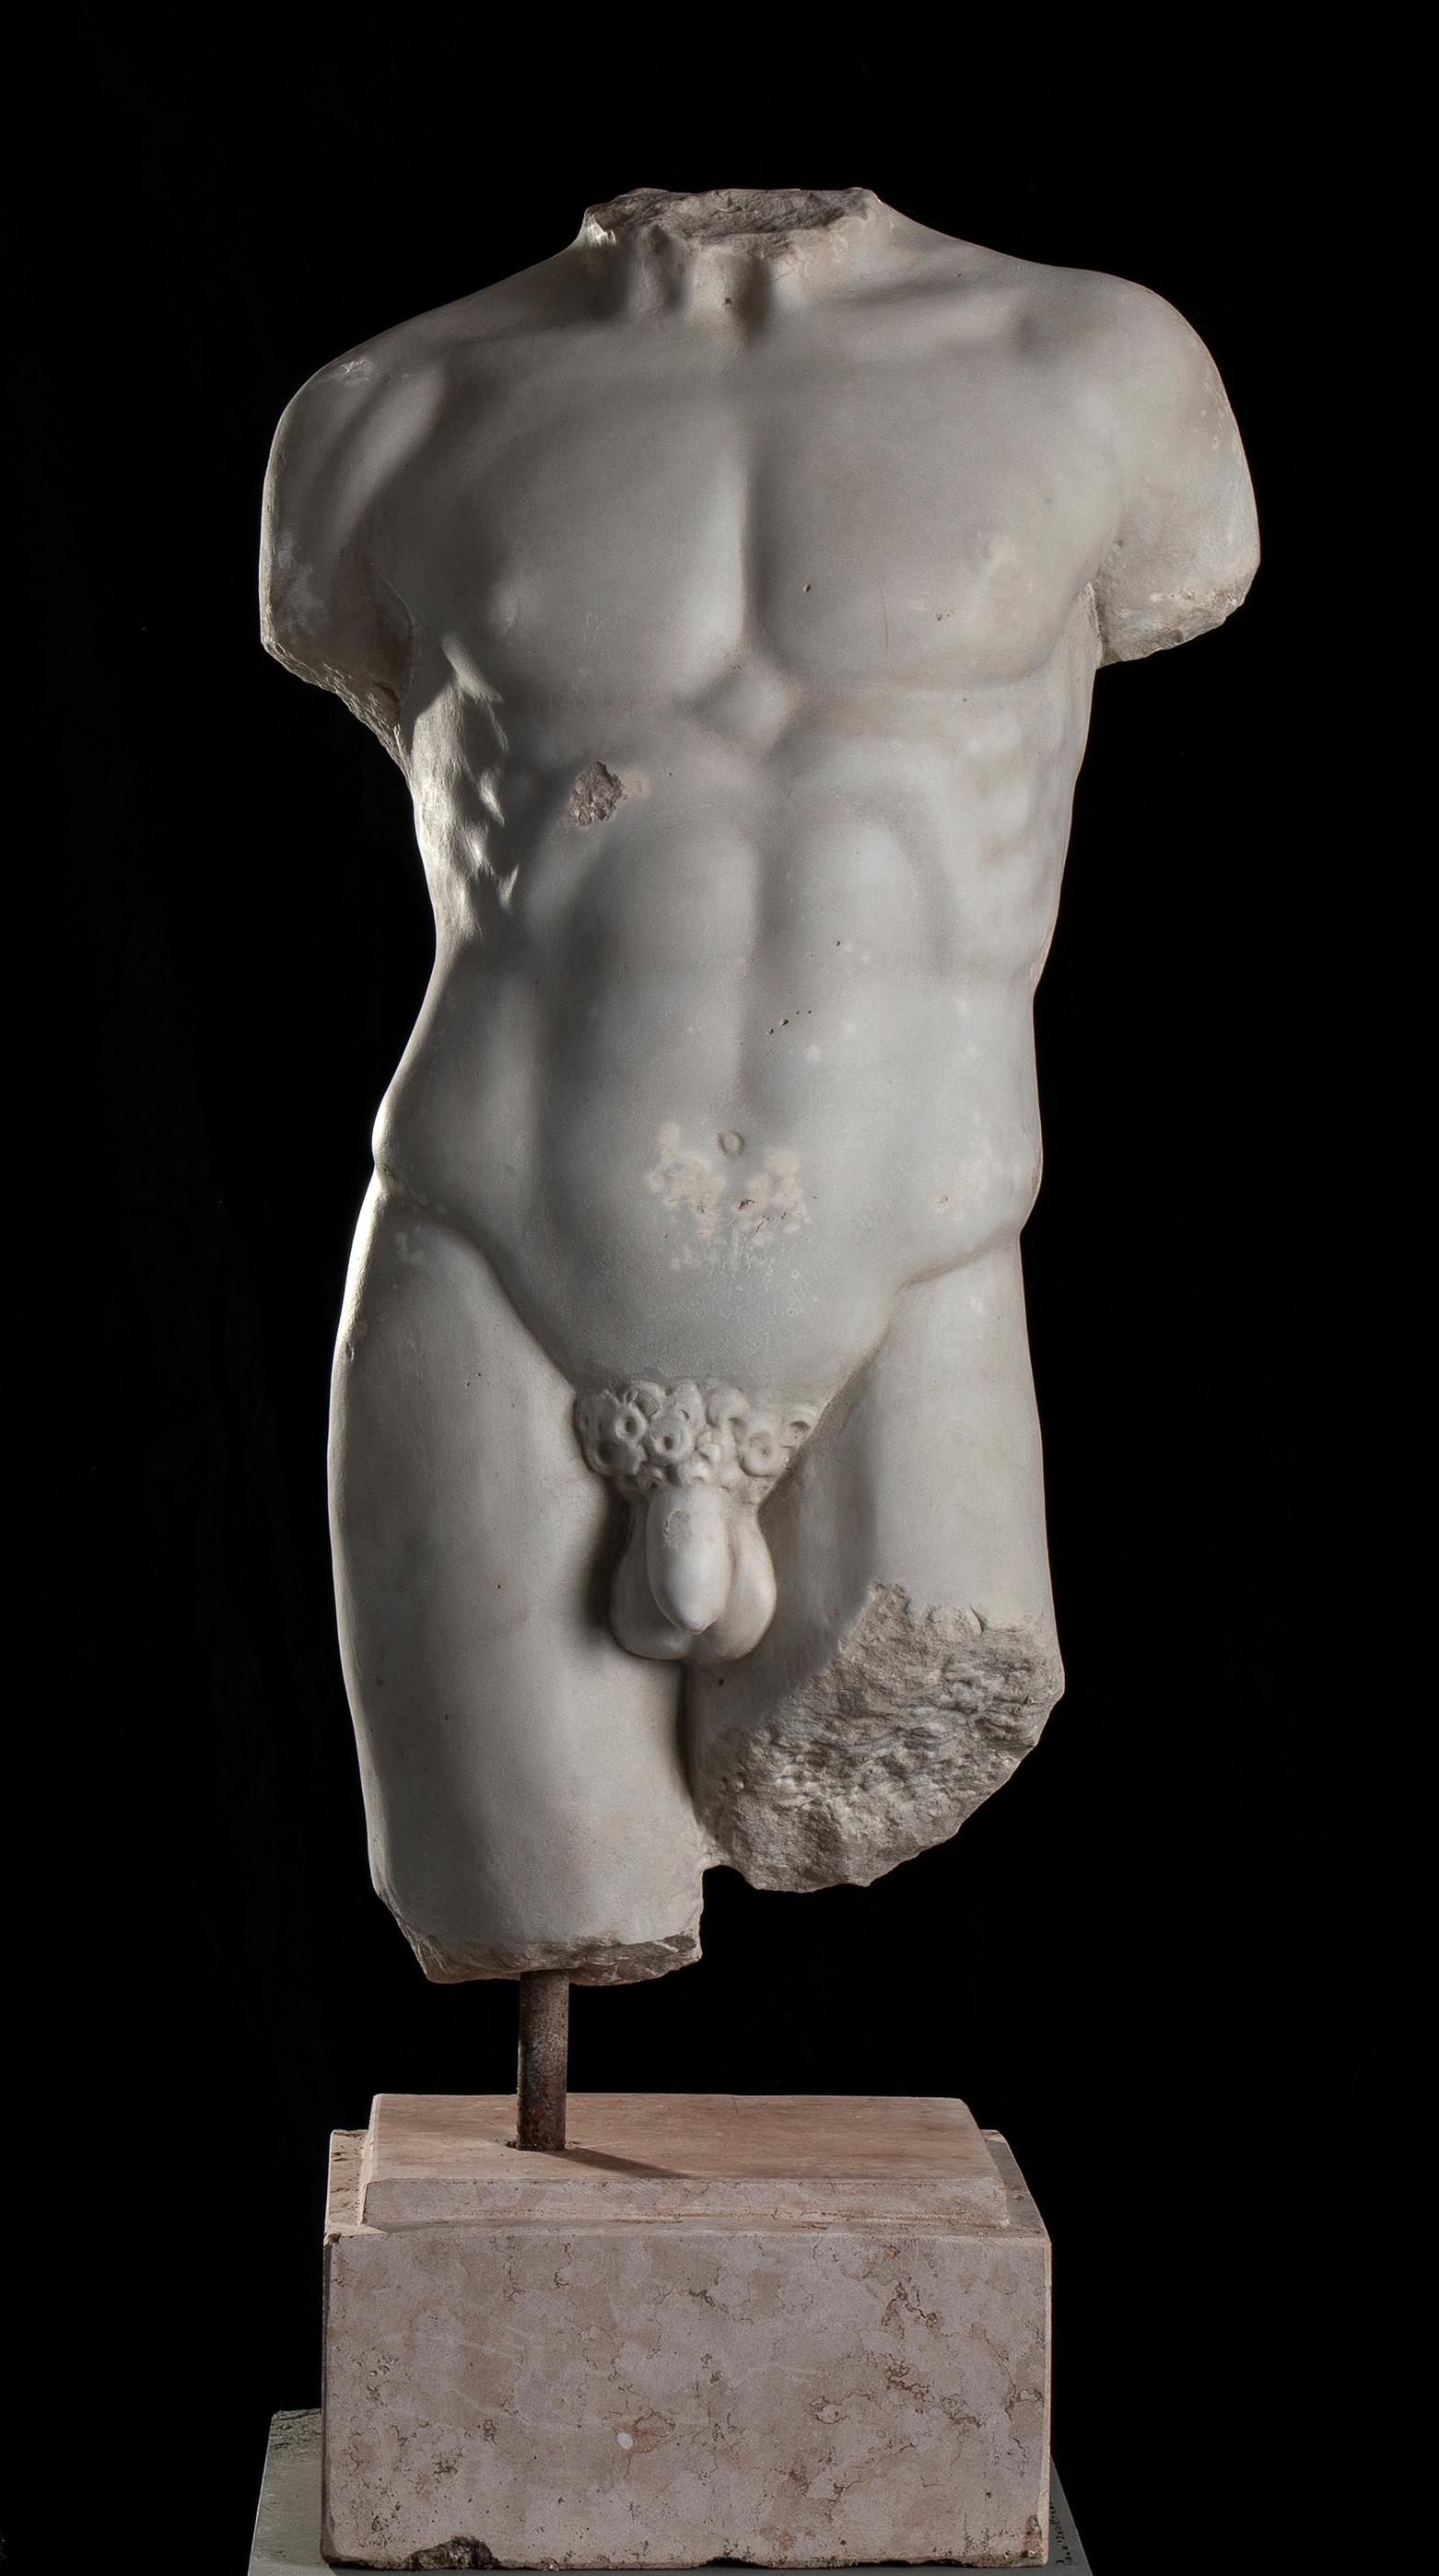 Unknown Nude Sculpture - Statuary Italian Marble Sculpture of Torso Classical Roman of Athlete or God 